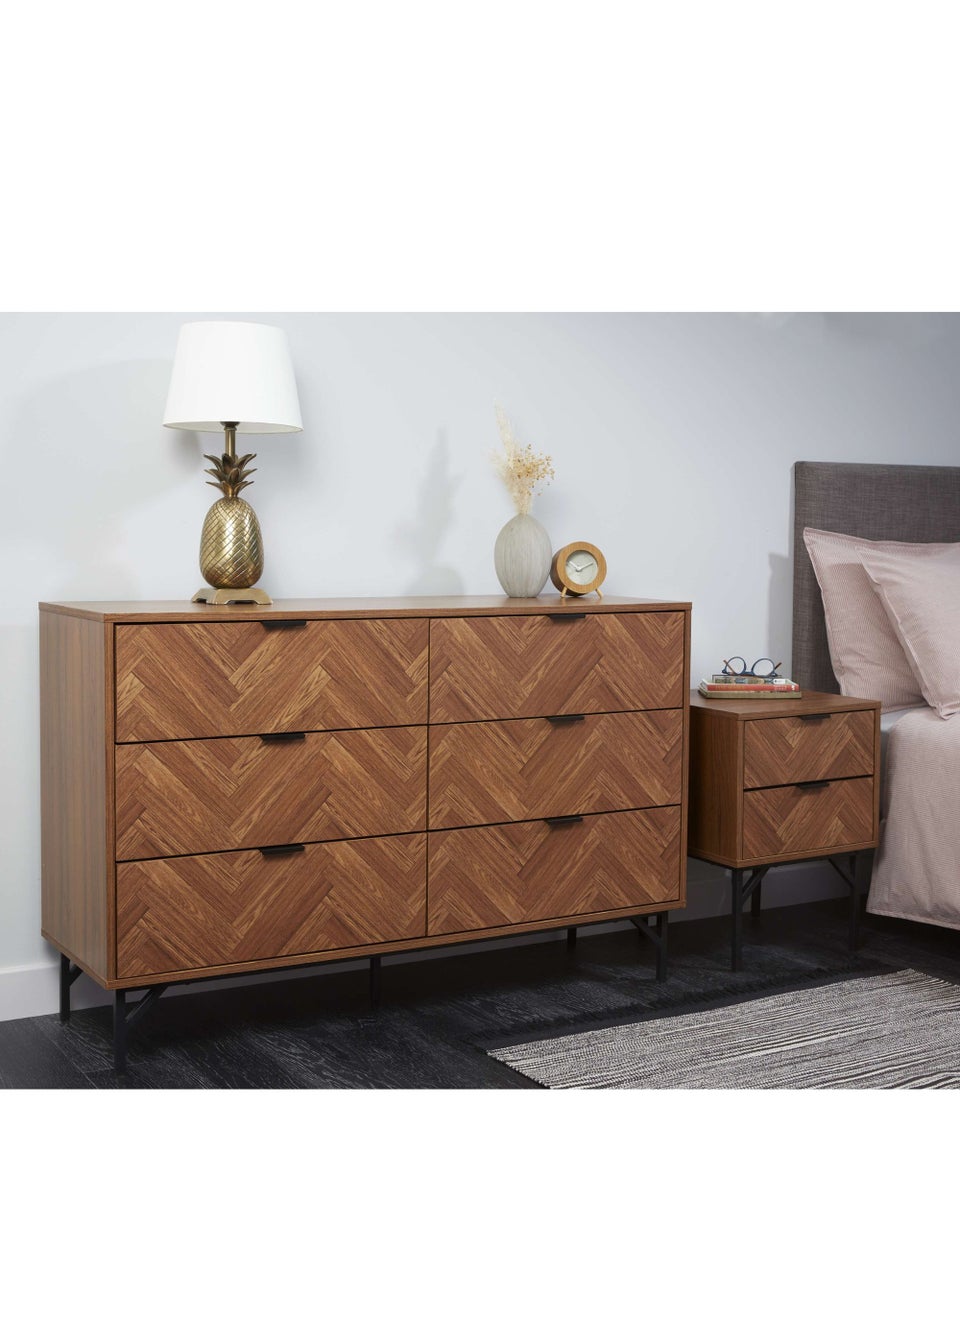 Lloyd Pascal Caprio 6 Drawer Chest with Metal Legs